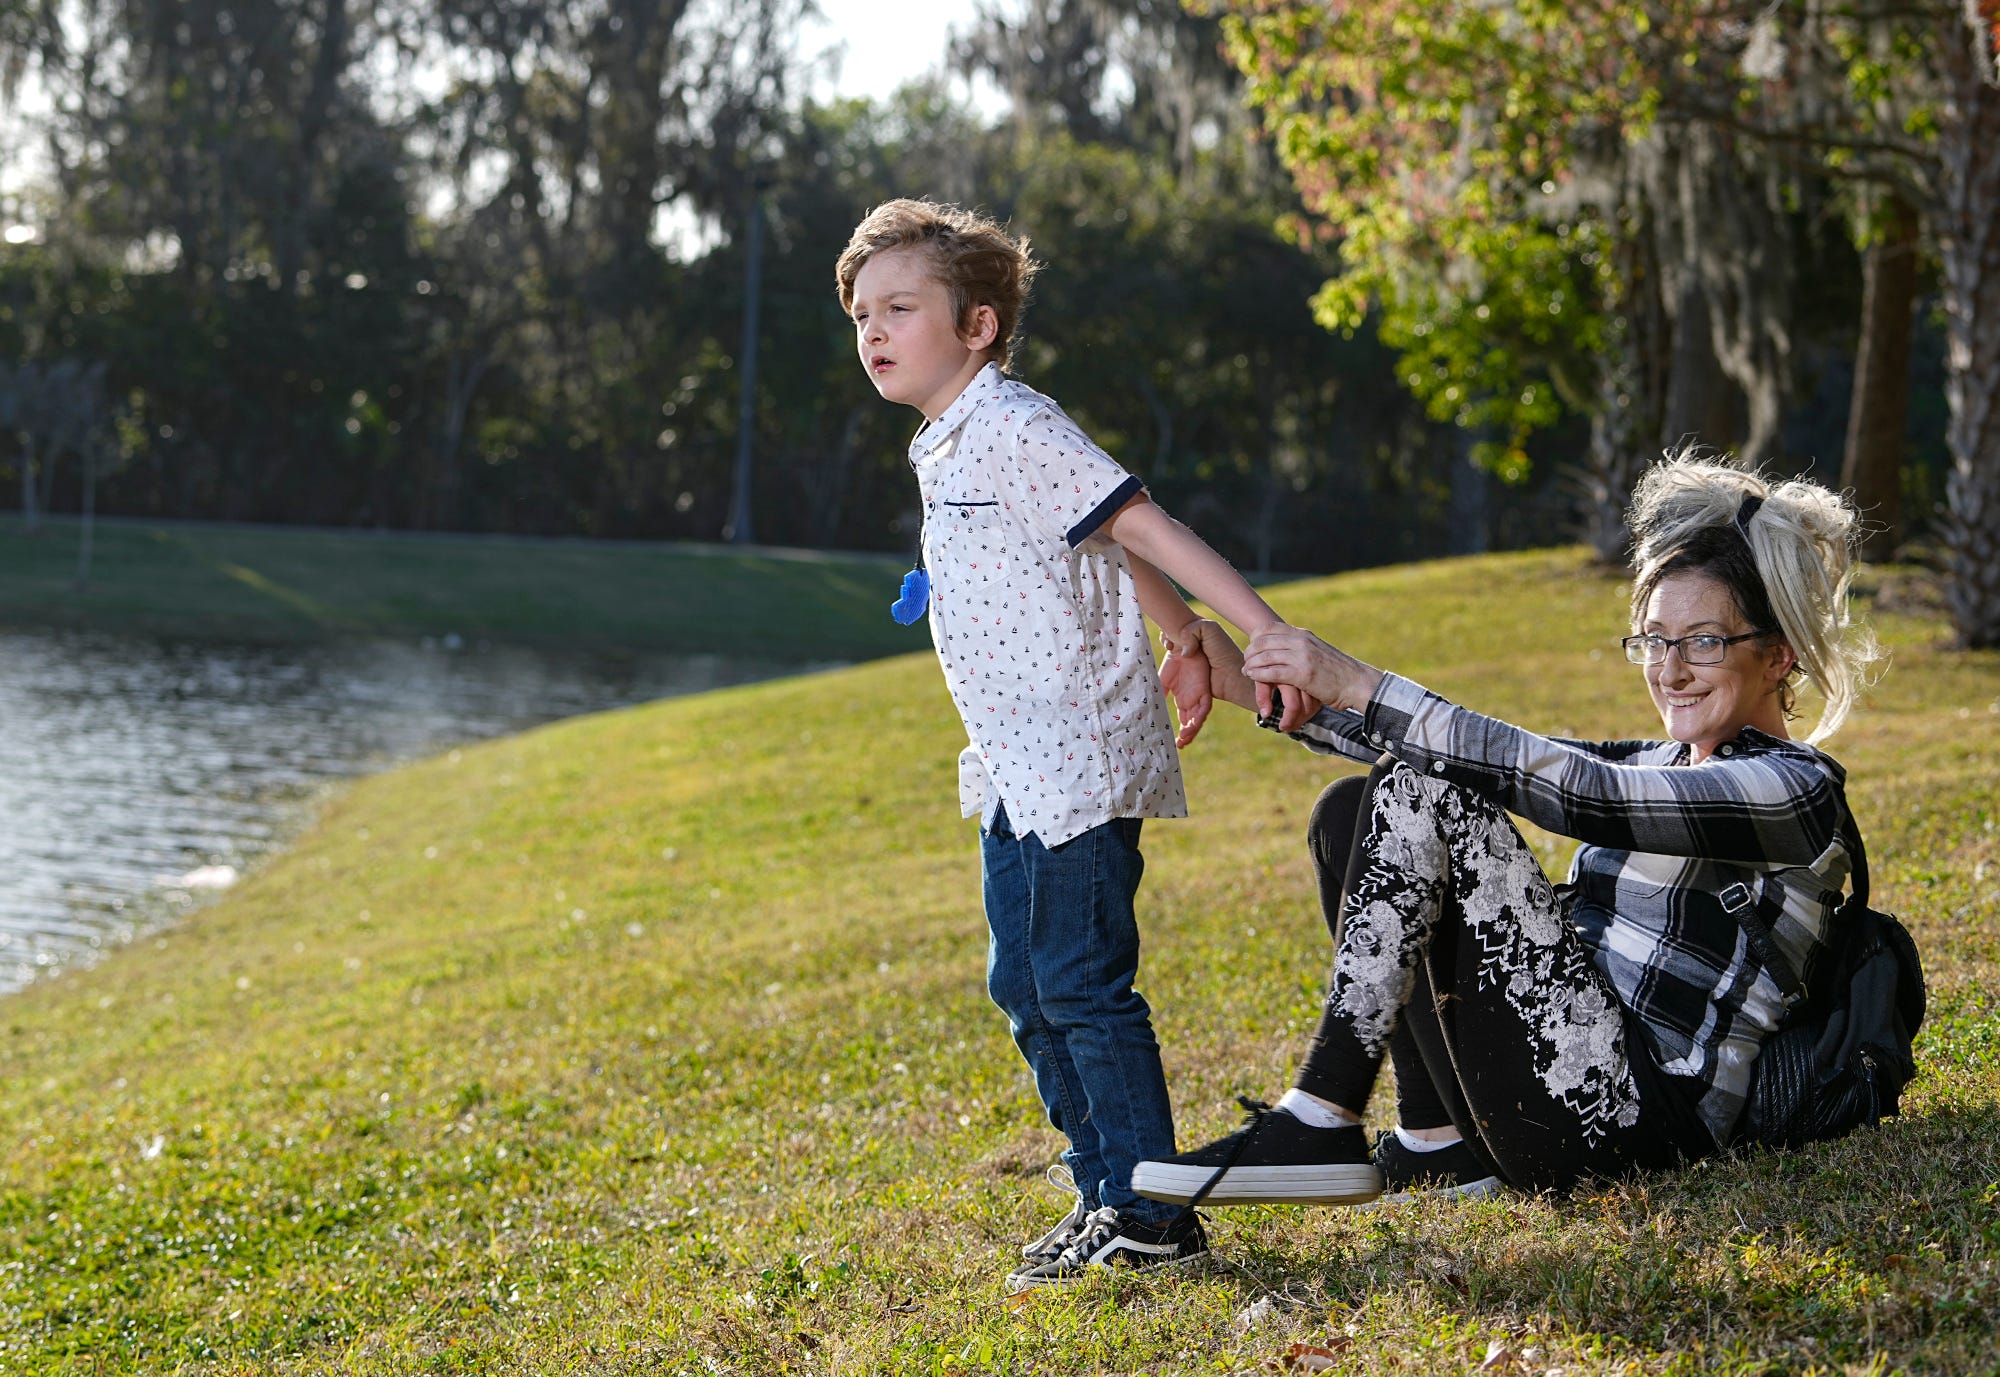 Tiffany Clark, 35, holds her son at a Daytona Beach park. Like many children with autism, Kylhar, 7, sometimes pulls away from caregivers and wears a soft toy around his neck to chew when he grows frustrated.